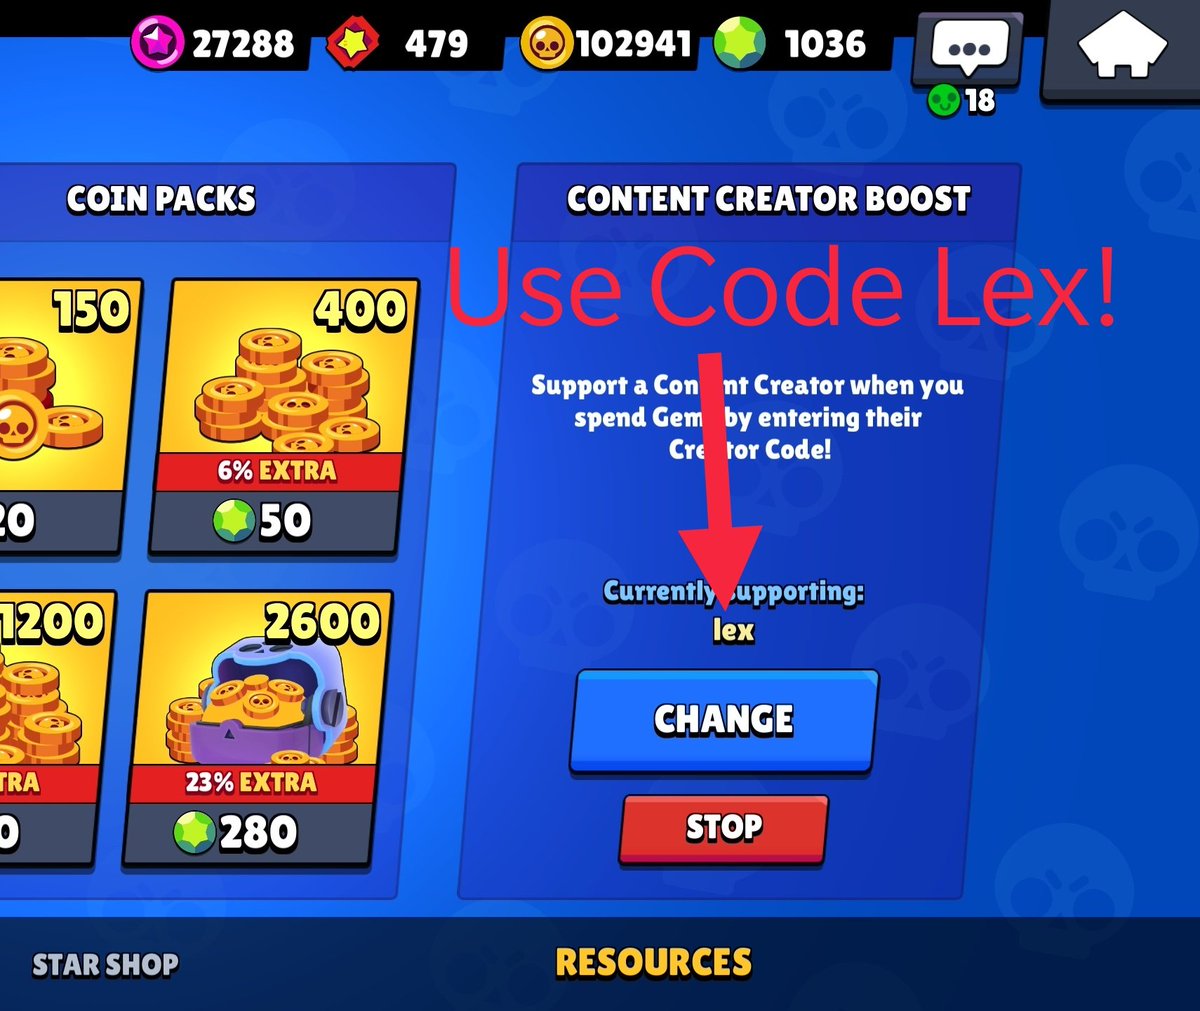 Lex On Twitter Use Code Lex Creator Codes Back In Brawlstars Just Scroll To The Right In The Shop Enter Lex And You Re Garunteed Free Legendary Brawlers So That Last Part Isn T - brawl stars redeem code 2021